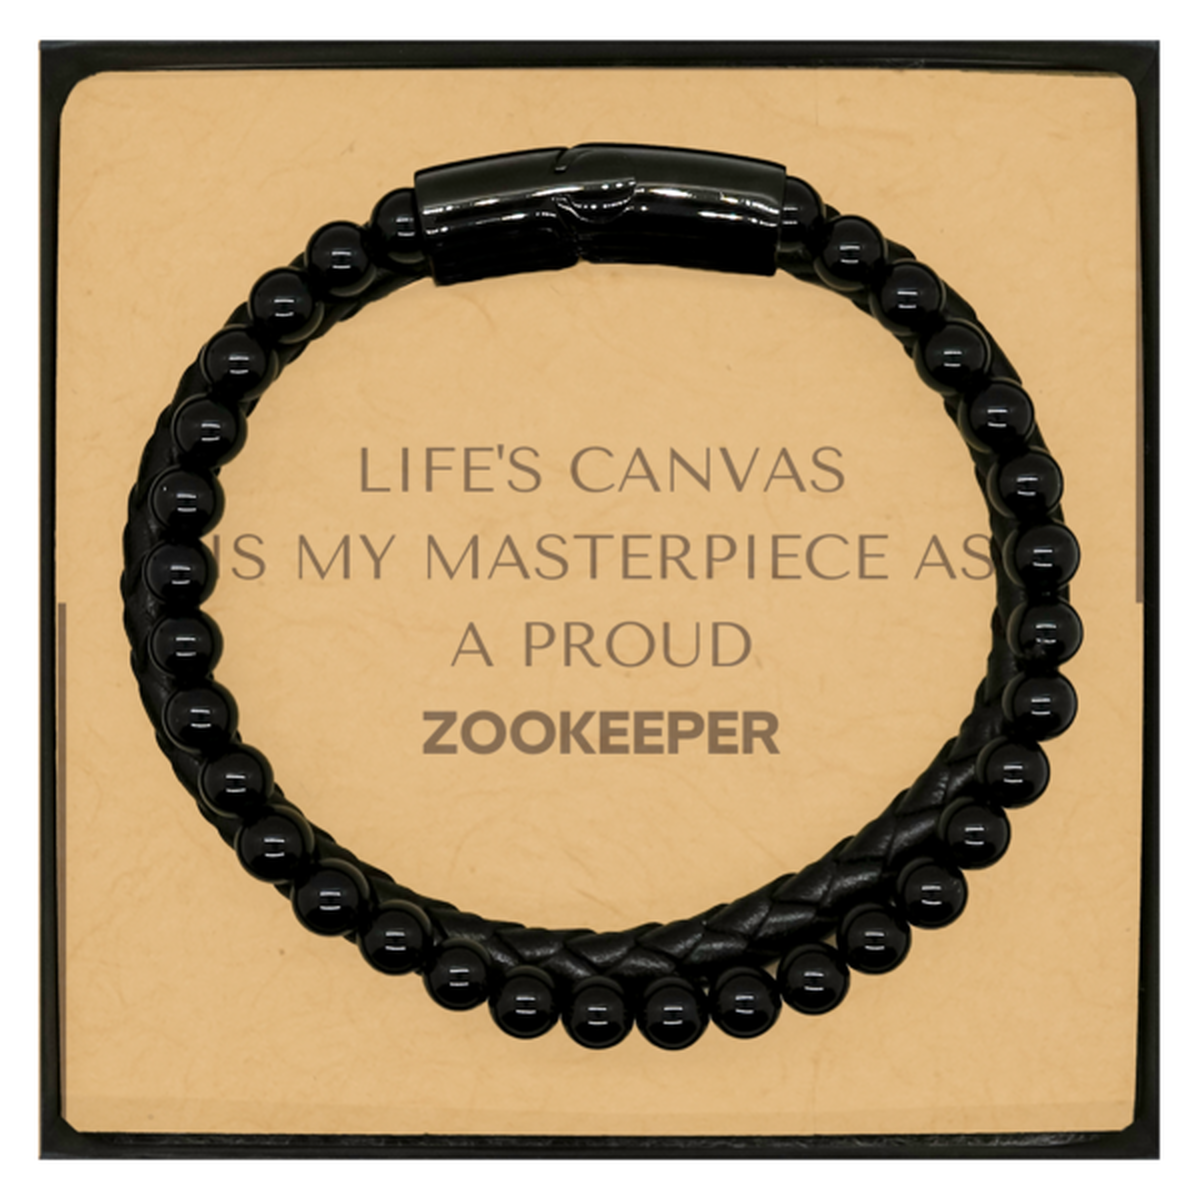 Proud Zookeeper Gifts, Life's canvas is my masterpiece, Epic Birthday Christmas Unique Stone Leather Bracelets For Zookeeper, Coworkers, Men, Women, Friends